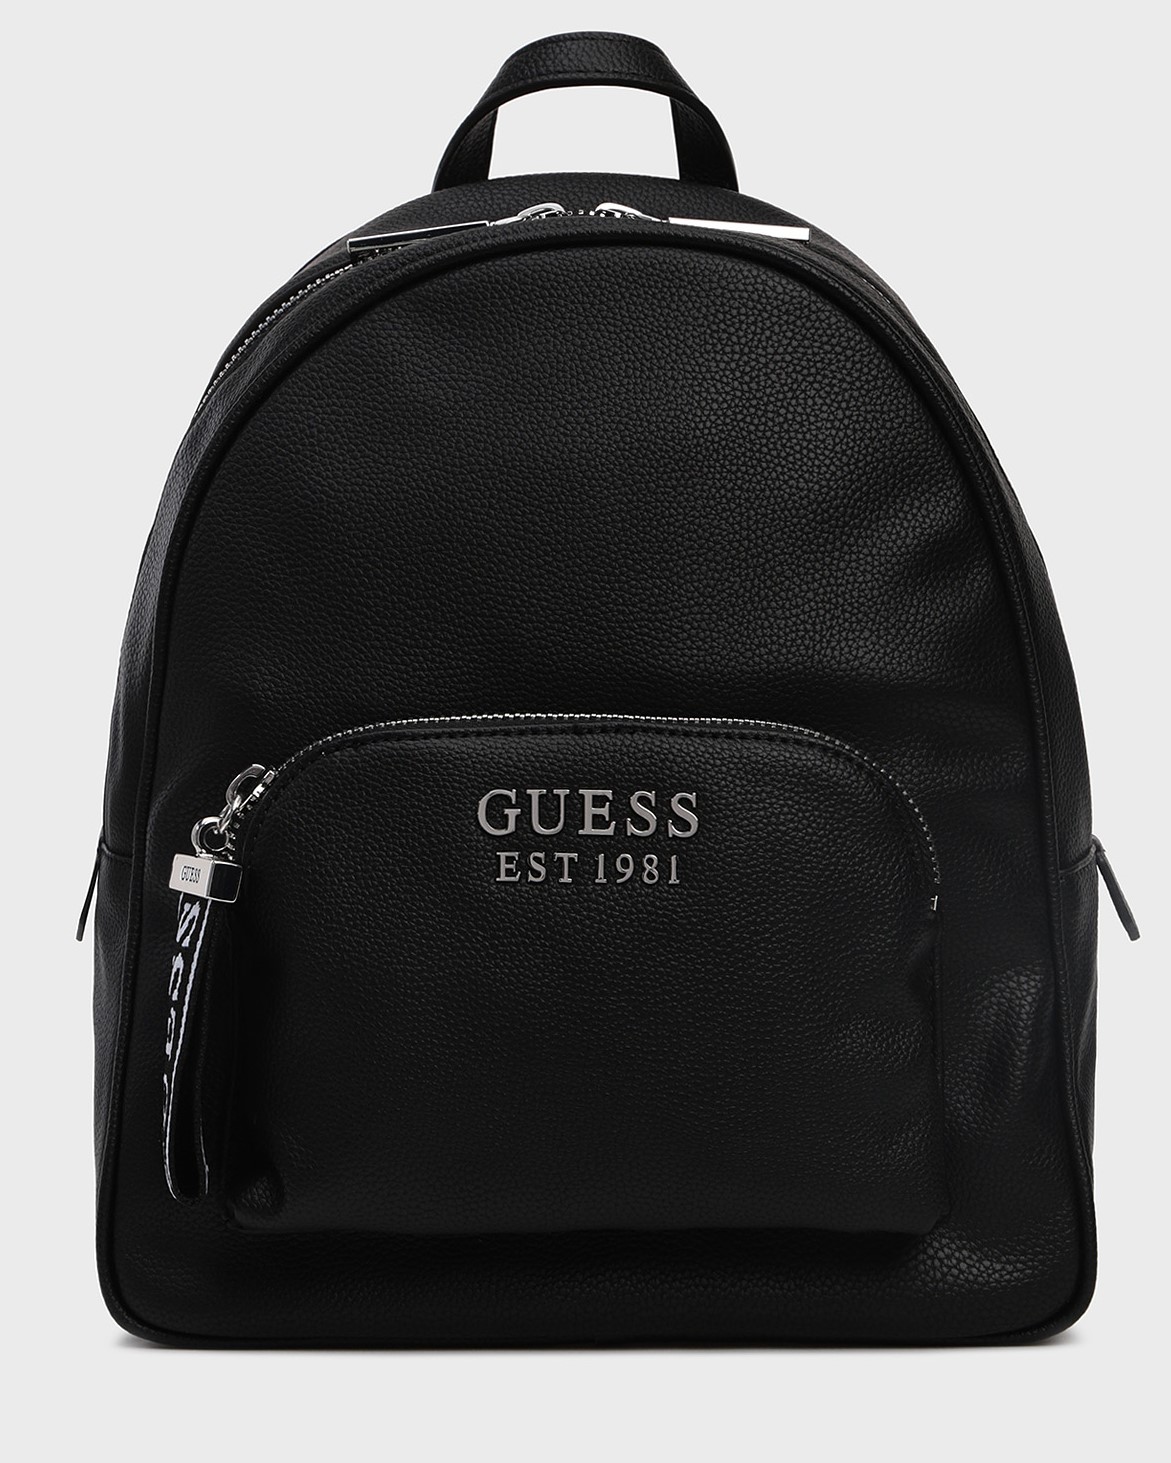 BALO NỮ GUESS BACKPACK 12